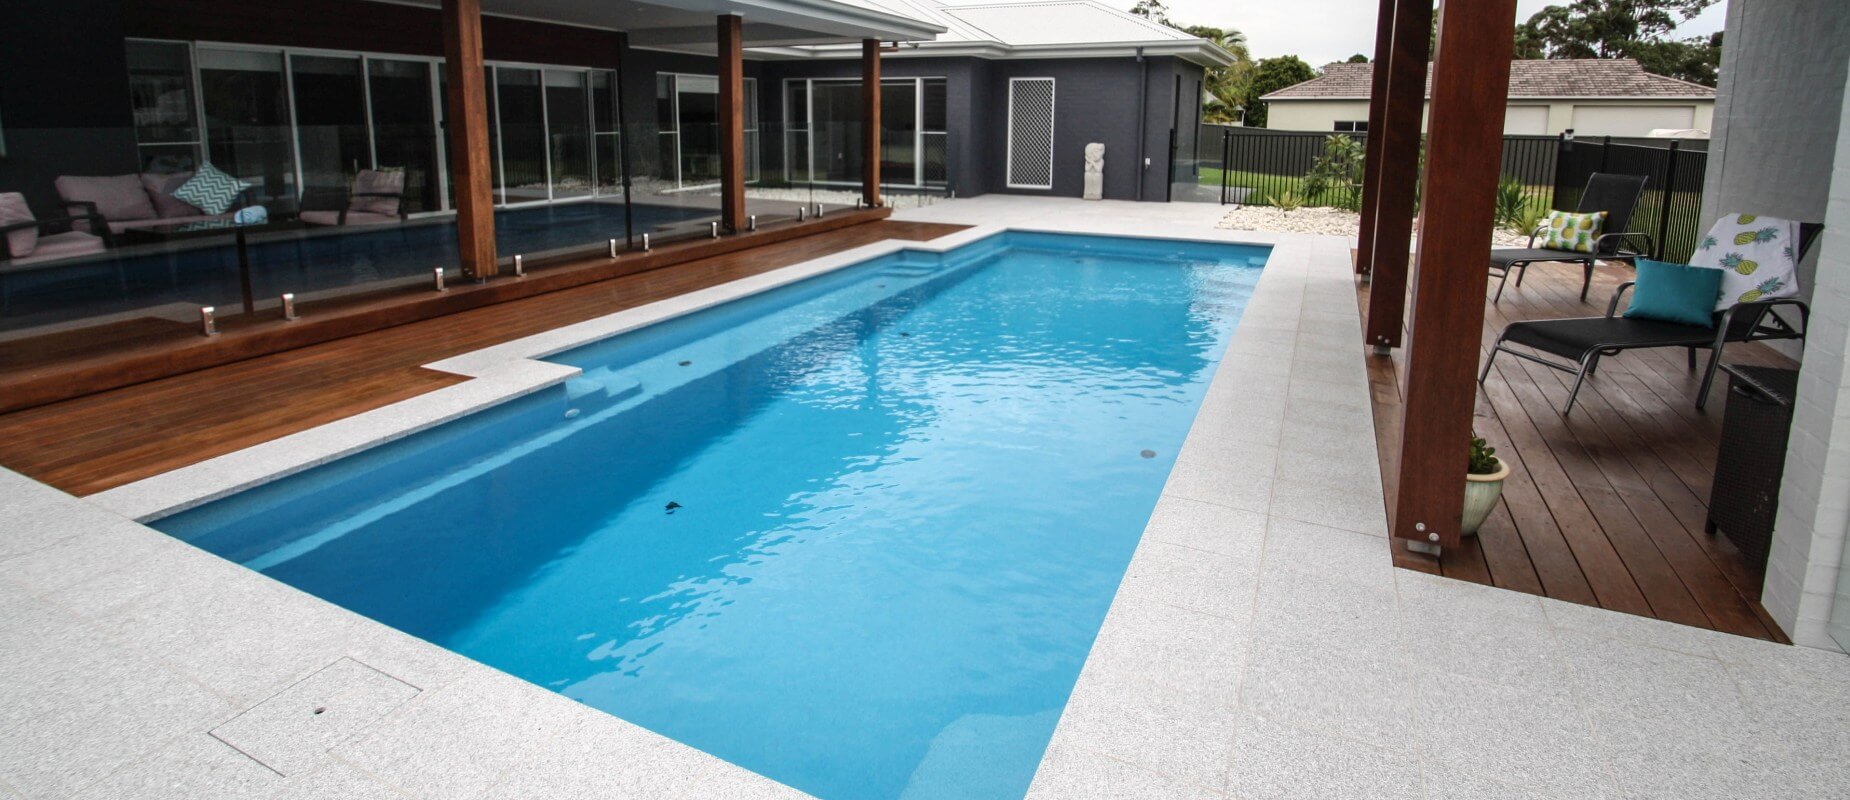 014-Compass-Pools-Australia_Intelligent-pool-with-self-cleaning-system_Vogue-pool-shape